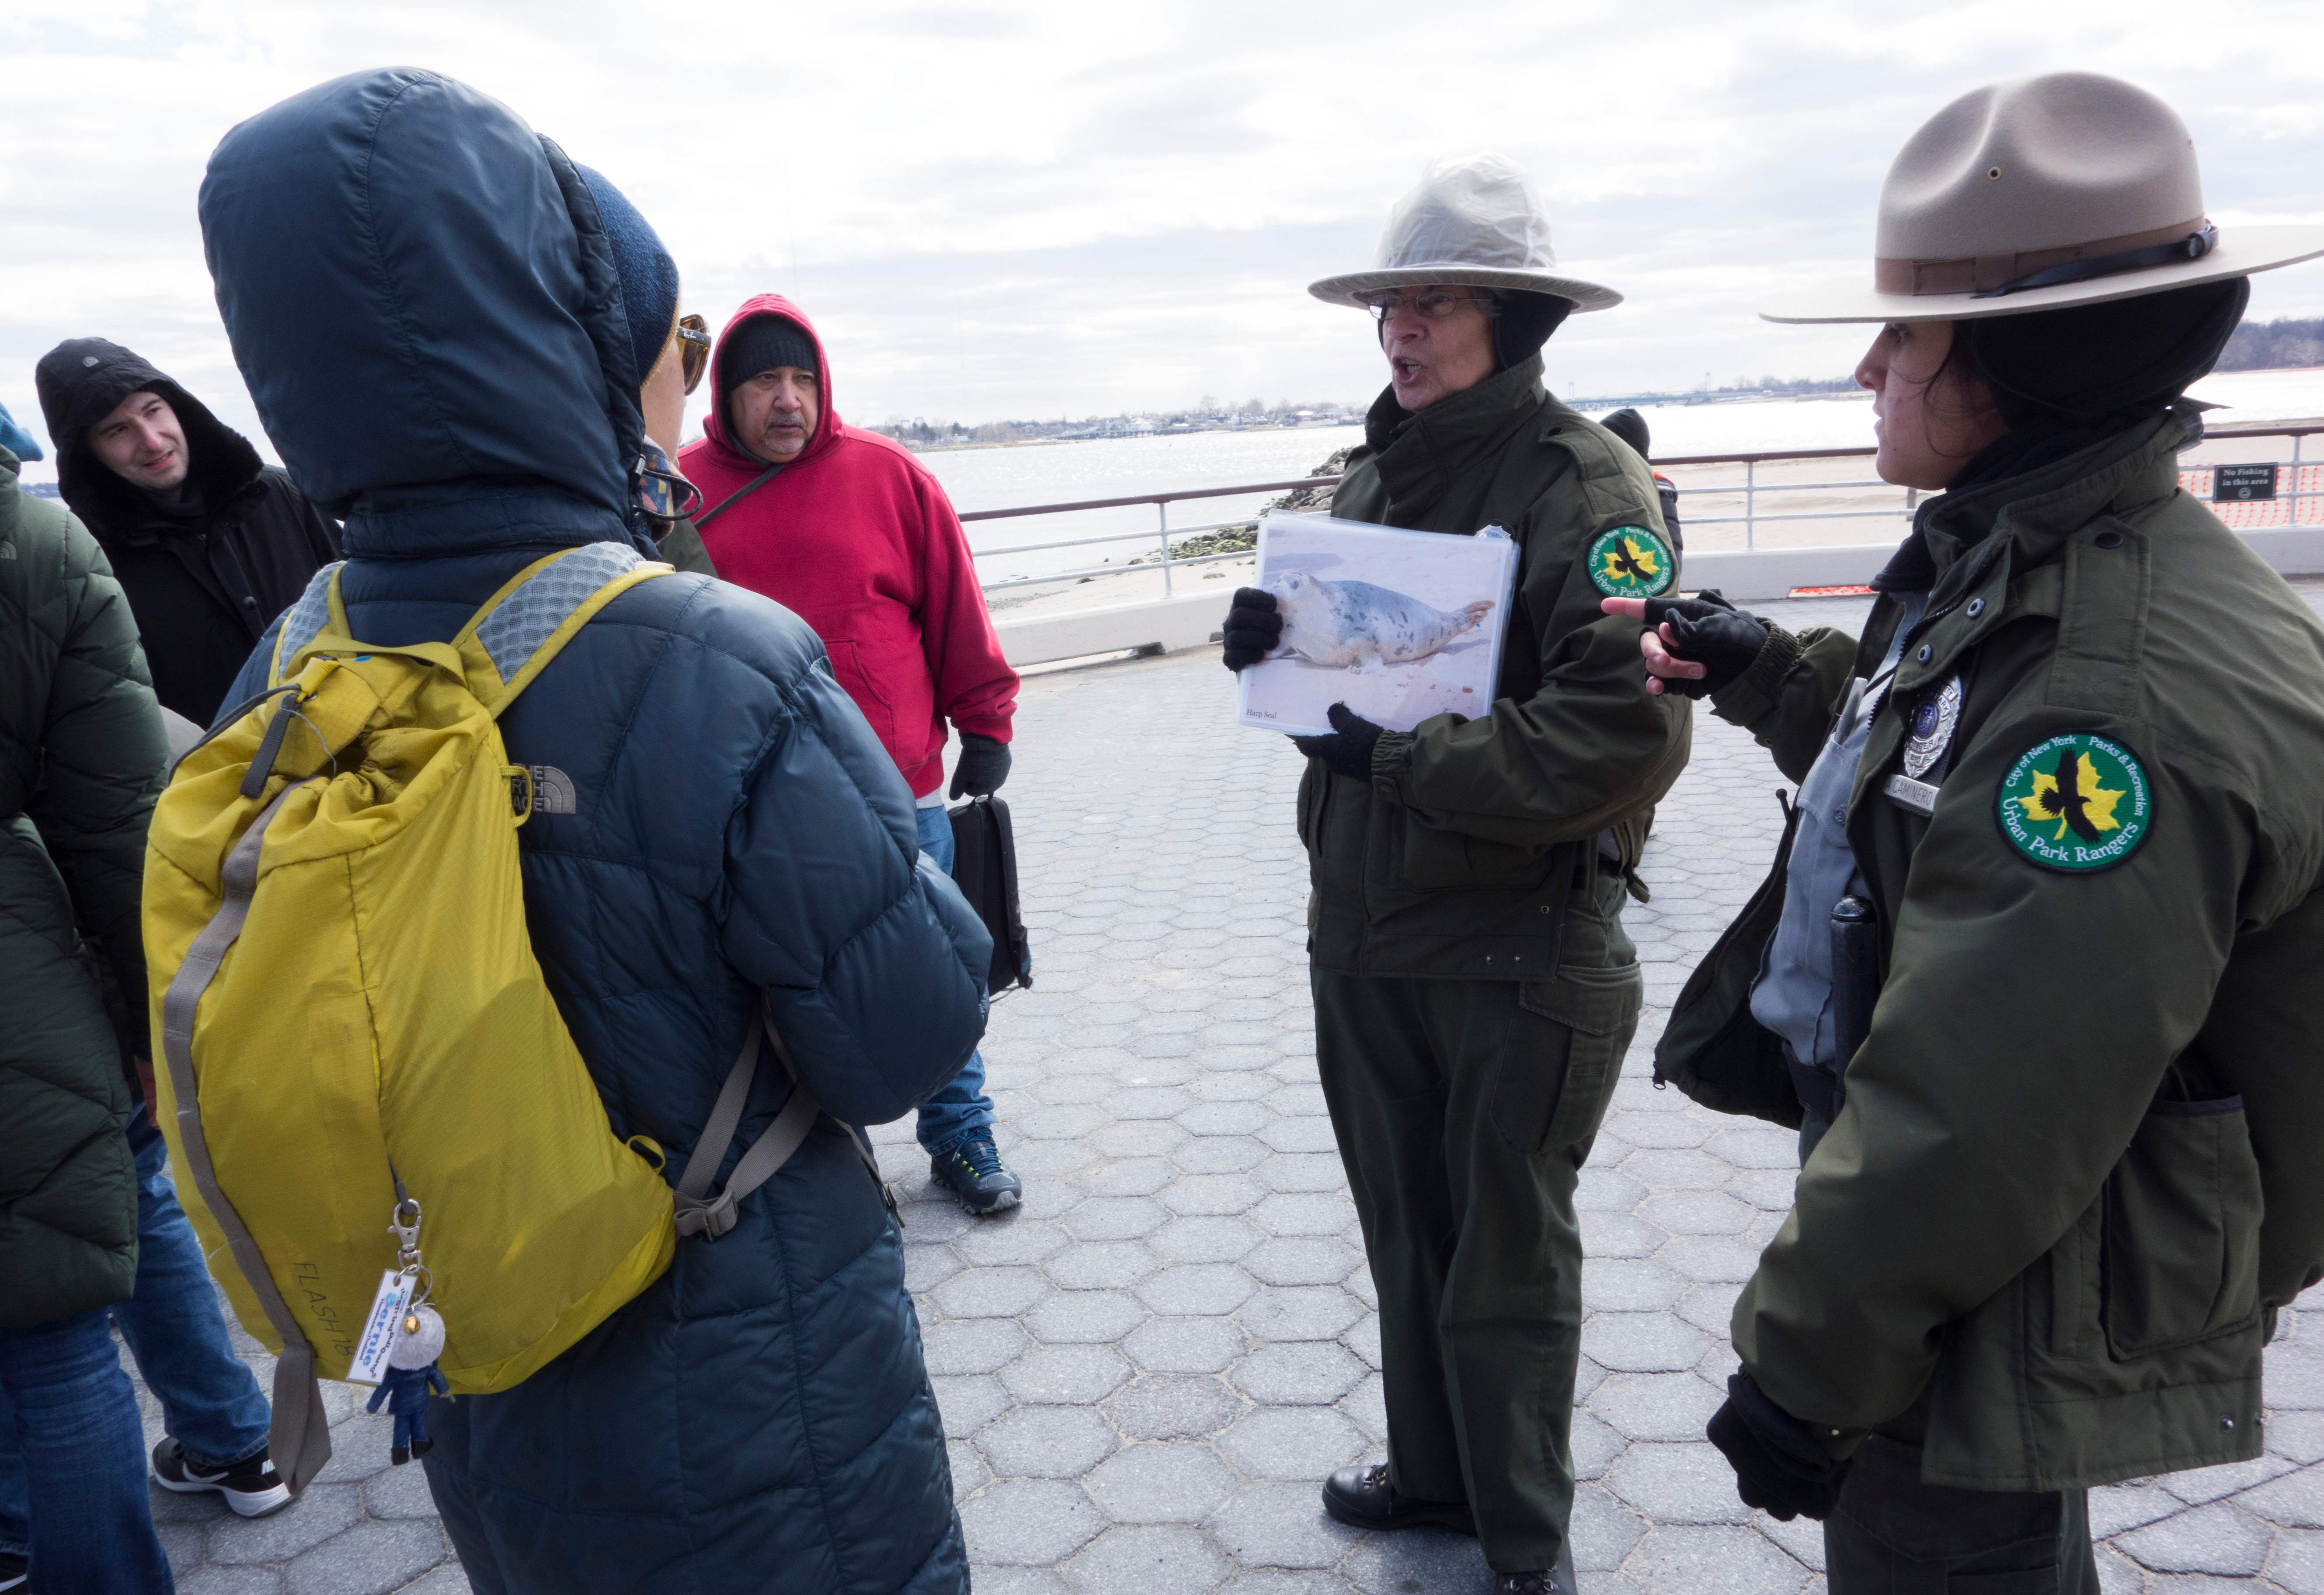 New York City Park Rangers Adriana Caminero (R) and A. Duran (C) explain to wildlife enthusiasts the types of seals they'll be looking for March 10, 2018 near Orchard Beach in New York.      From coyotes in the Bronx to red foxes in Queens, raccoons in Manhattan, owls in Brooklyn and deer in Staten Island, wildlife roams the urban jungle of New York. But coexistence is not always easy between millions of wild animals and 8.5 million humans. / AFP PHOTO / Don EMMERT / With AFP Story  by Laura BONILLA: Take a walk on New York's wild side